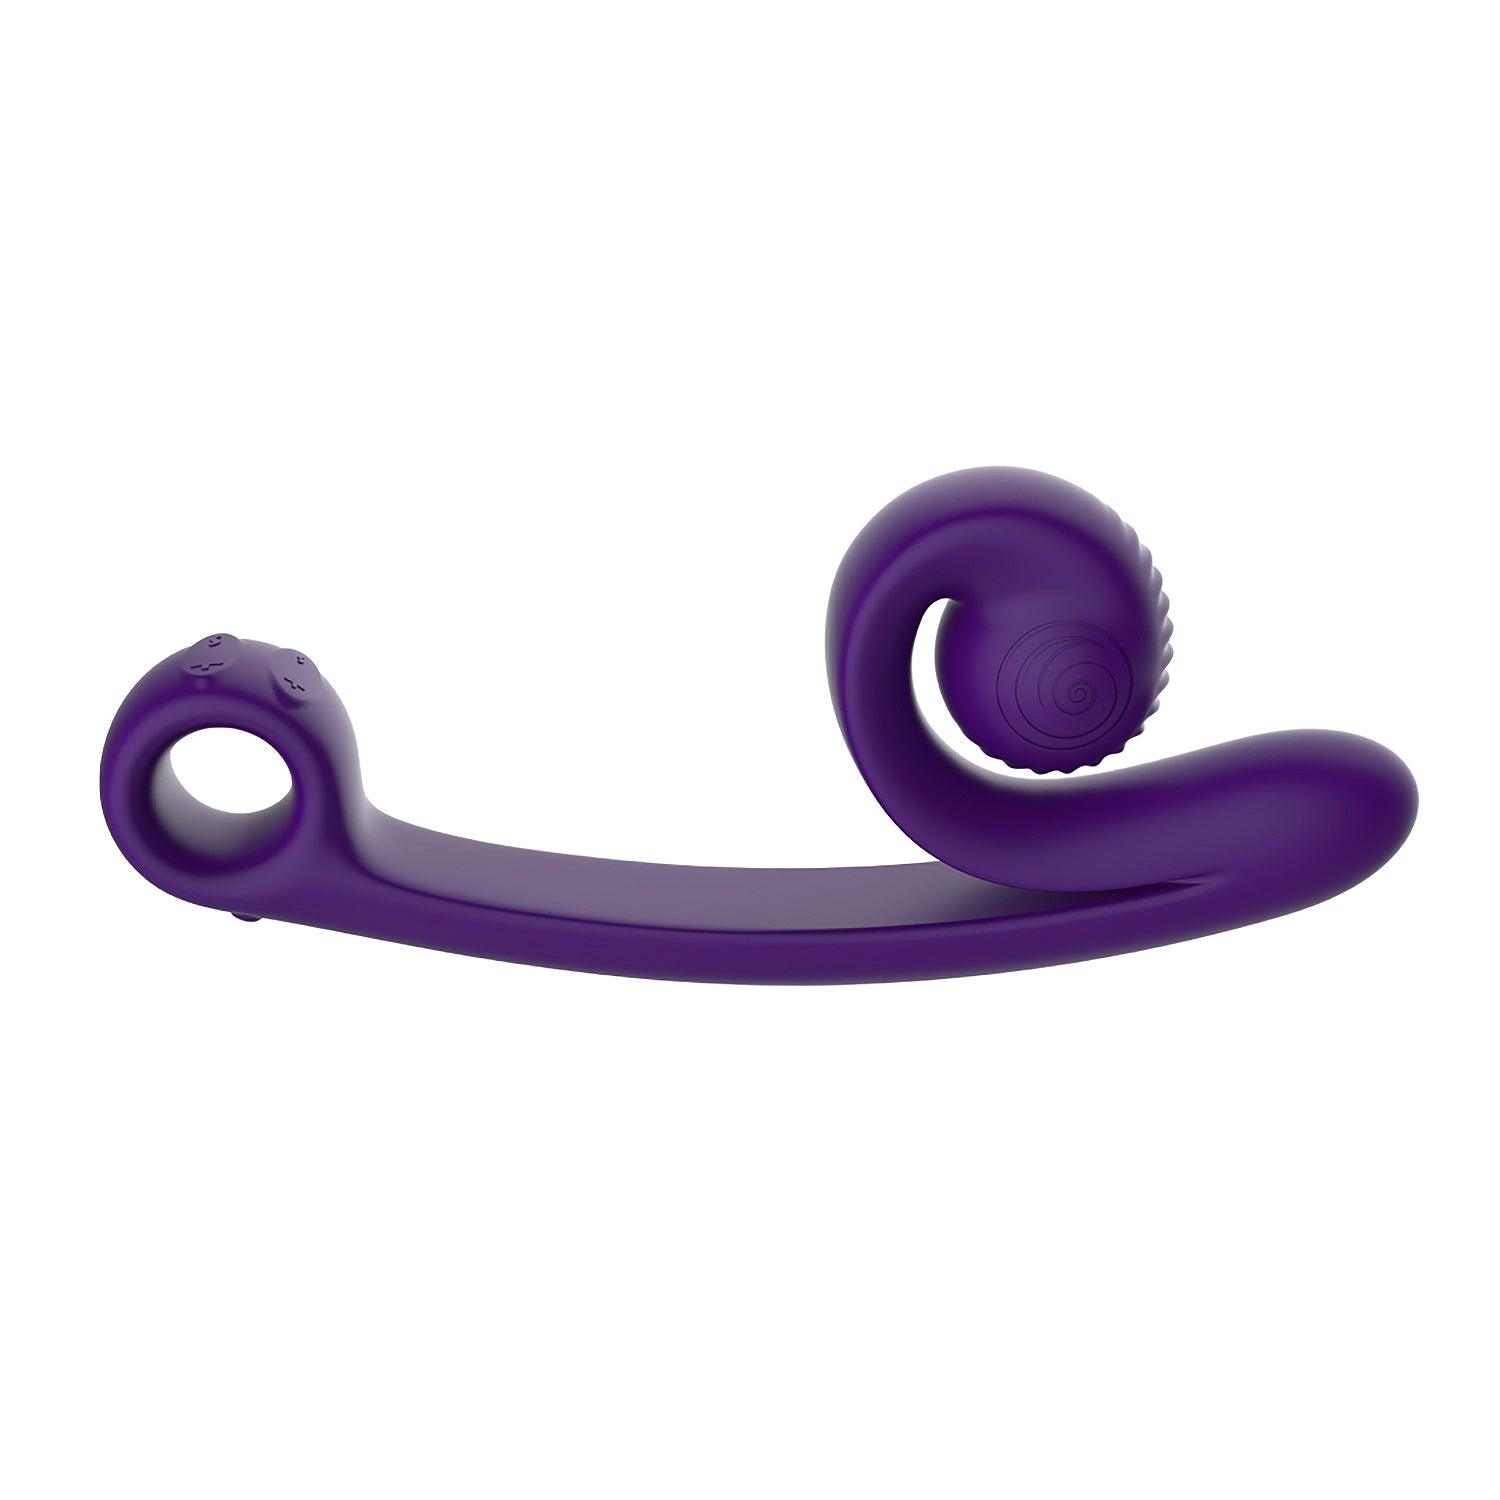 Snail Vibe Curve - Buy At Luxury Toy X - Free 3-Day Shipping